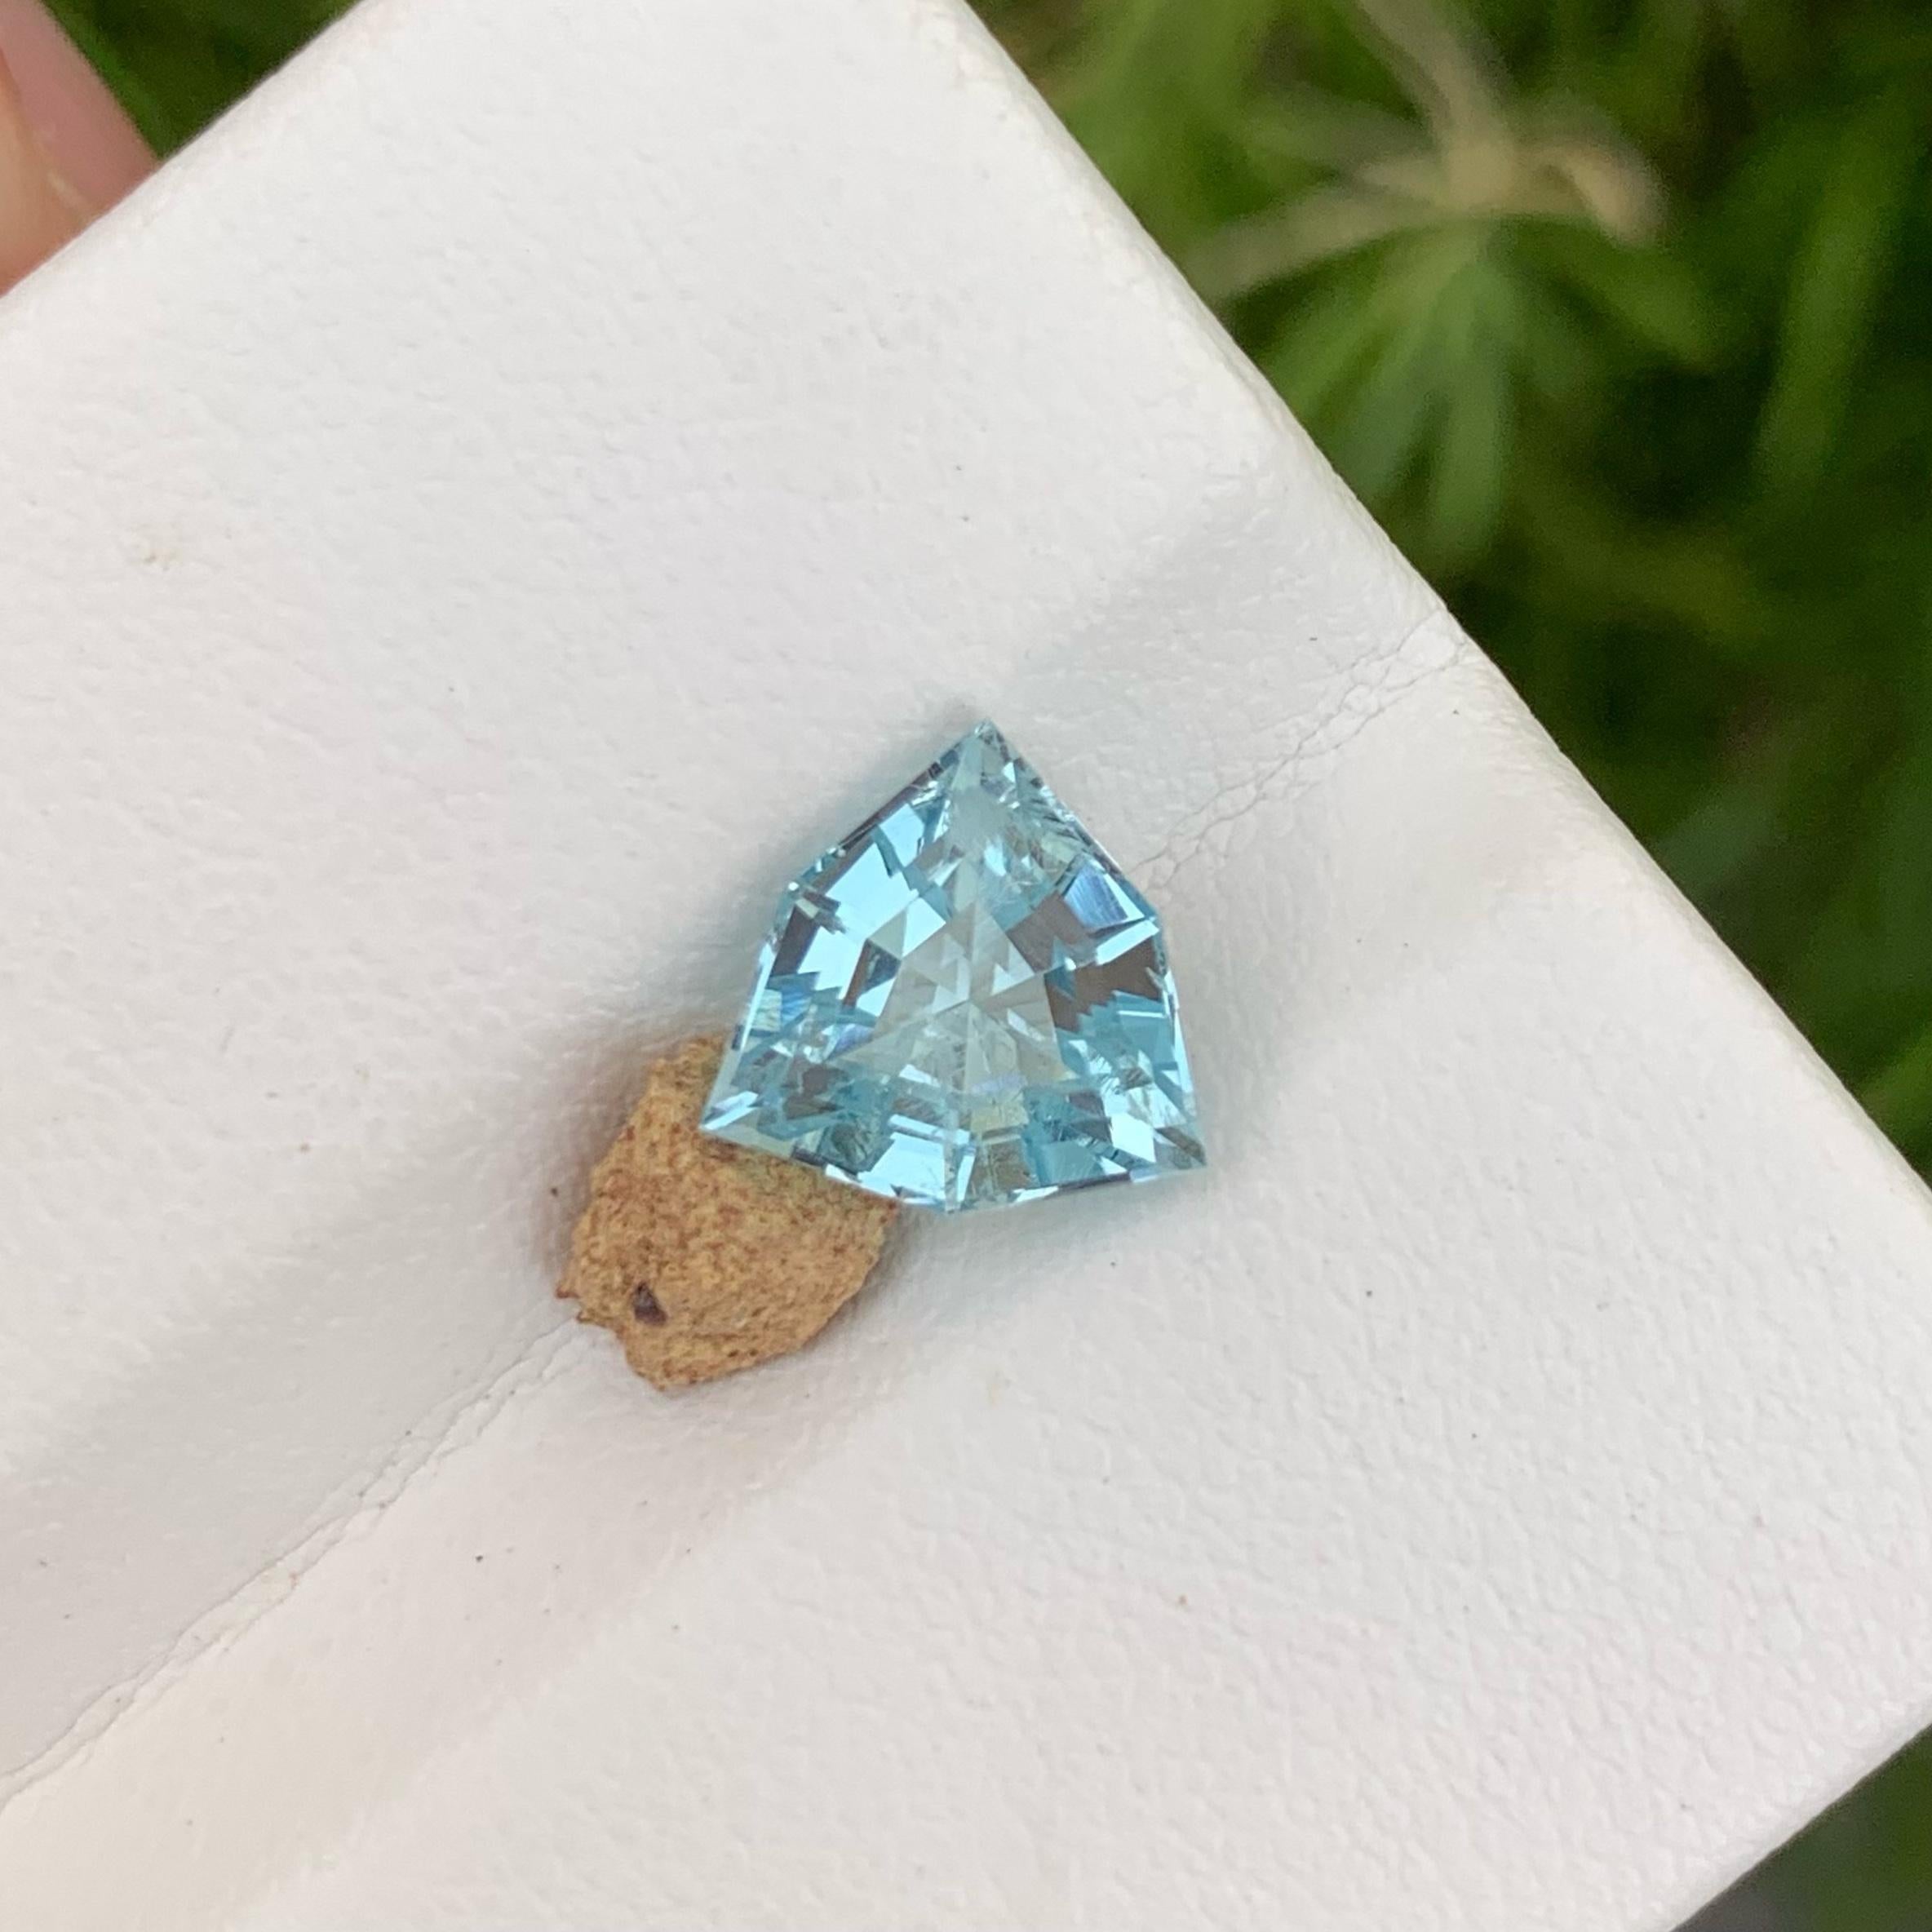 Weight 2.10 carats 
Dimensions 9x9x5.6mm
Treatment none 
Origin Pakistan 
Clarity Very small inclusions (VVS)
Shape Triangular 
Cut Trilliant

Introducing the mesmerizing Sea Blue Natural Aquamarine: a true embodiment of elegance and tranquility.